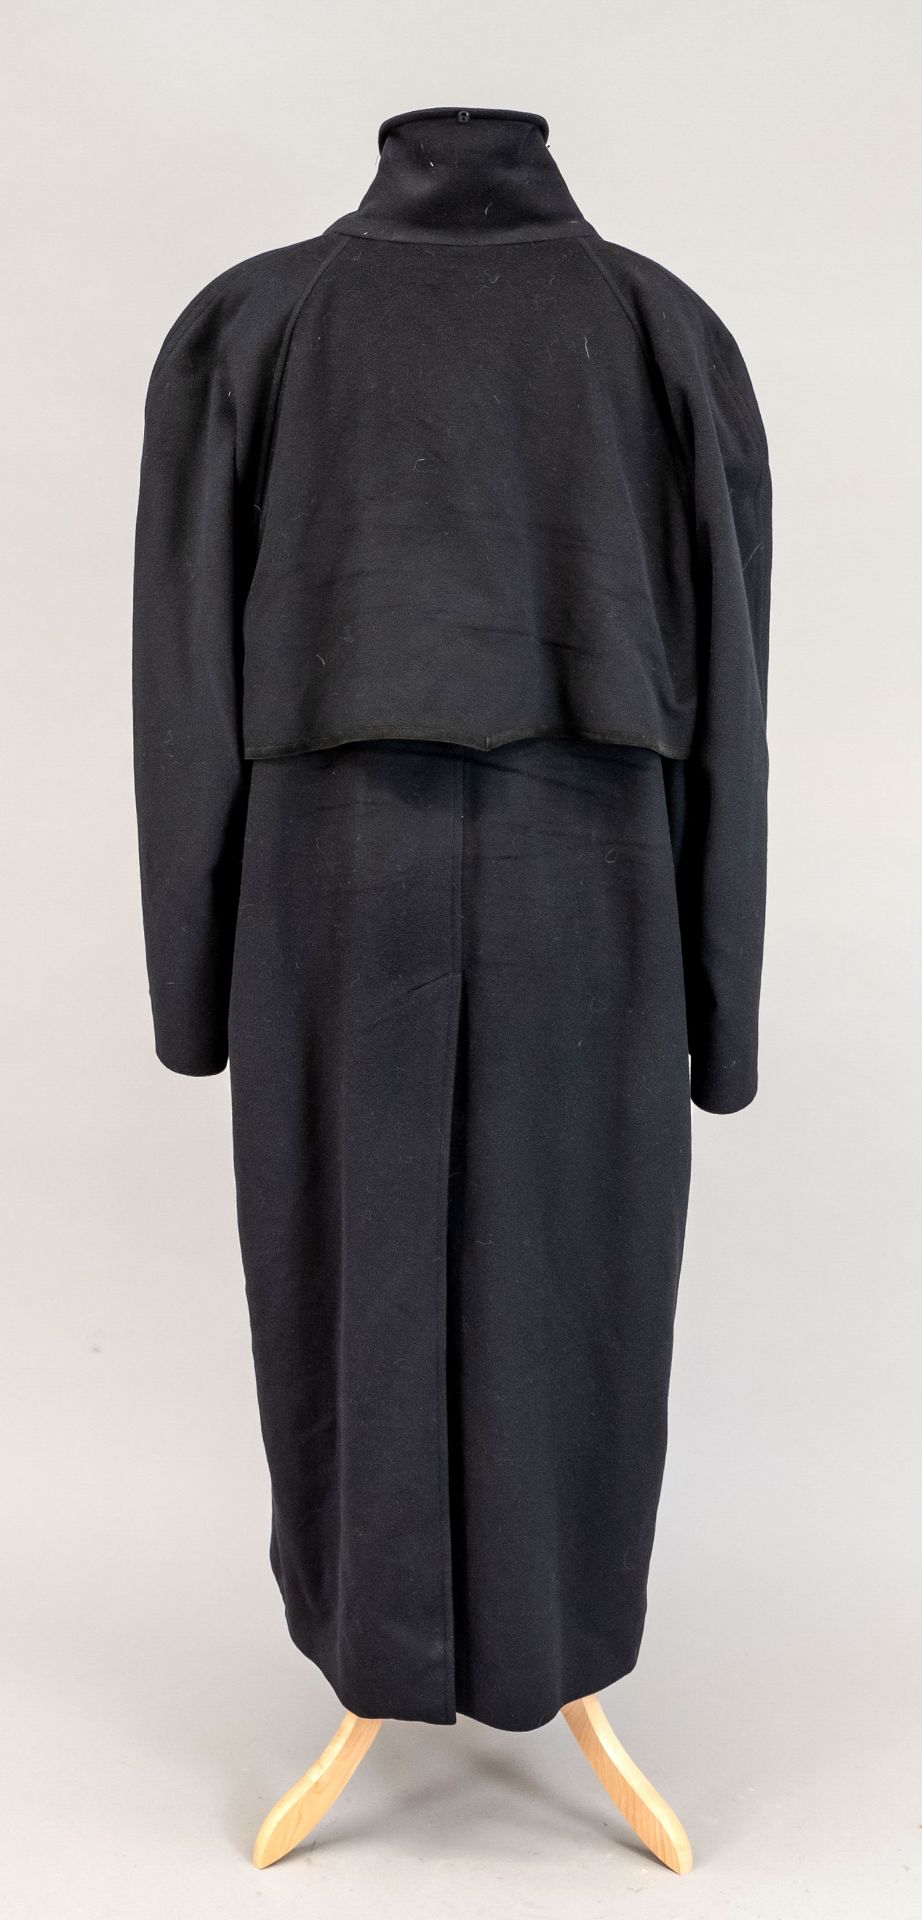 Unisex cashmere coat by Brioni, Italy, 2nd h. 20th c., Versace style silk lining, size 52, light - Image 2 of 3